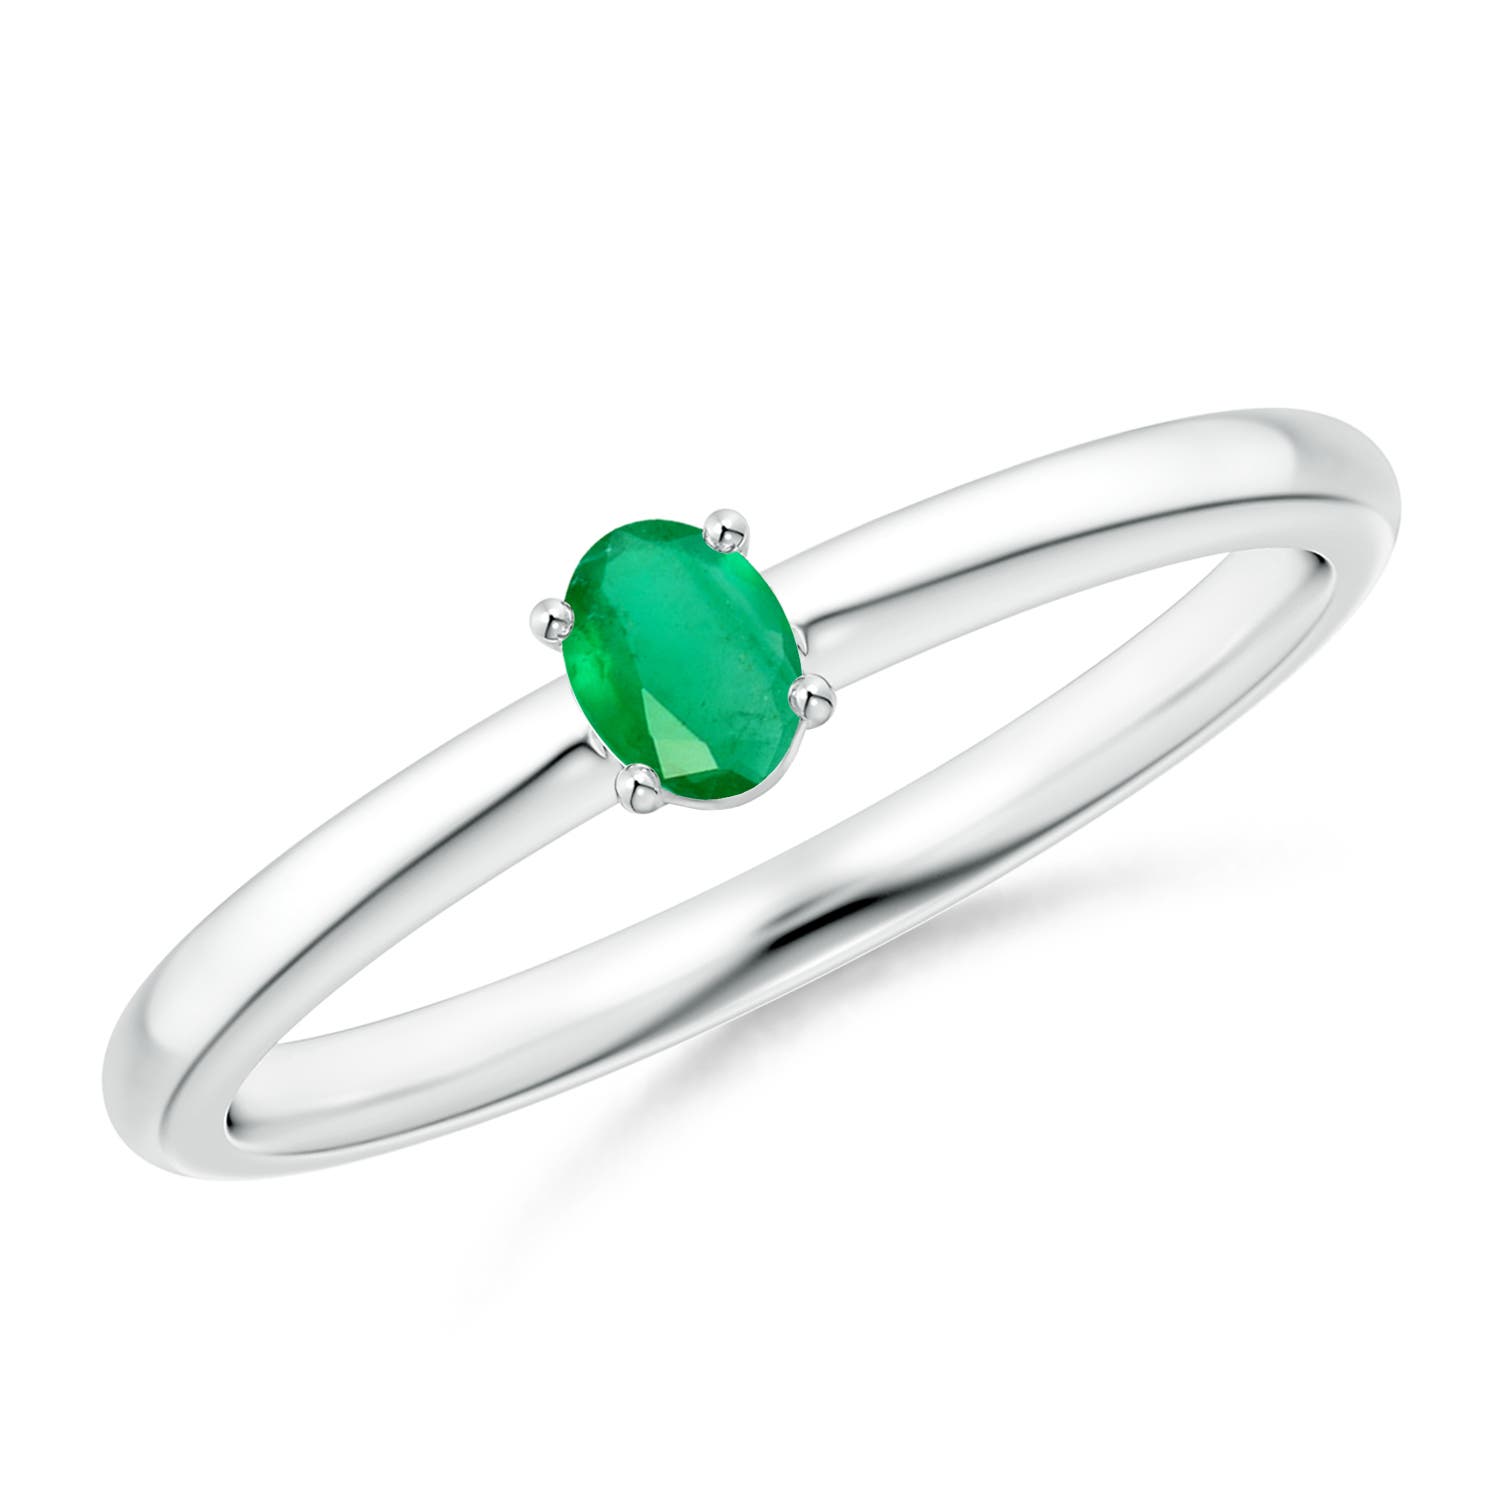 A - Emerald / 0.12 CT / 14 KT White Gold